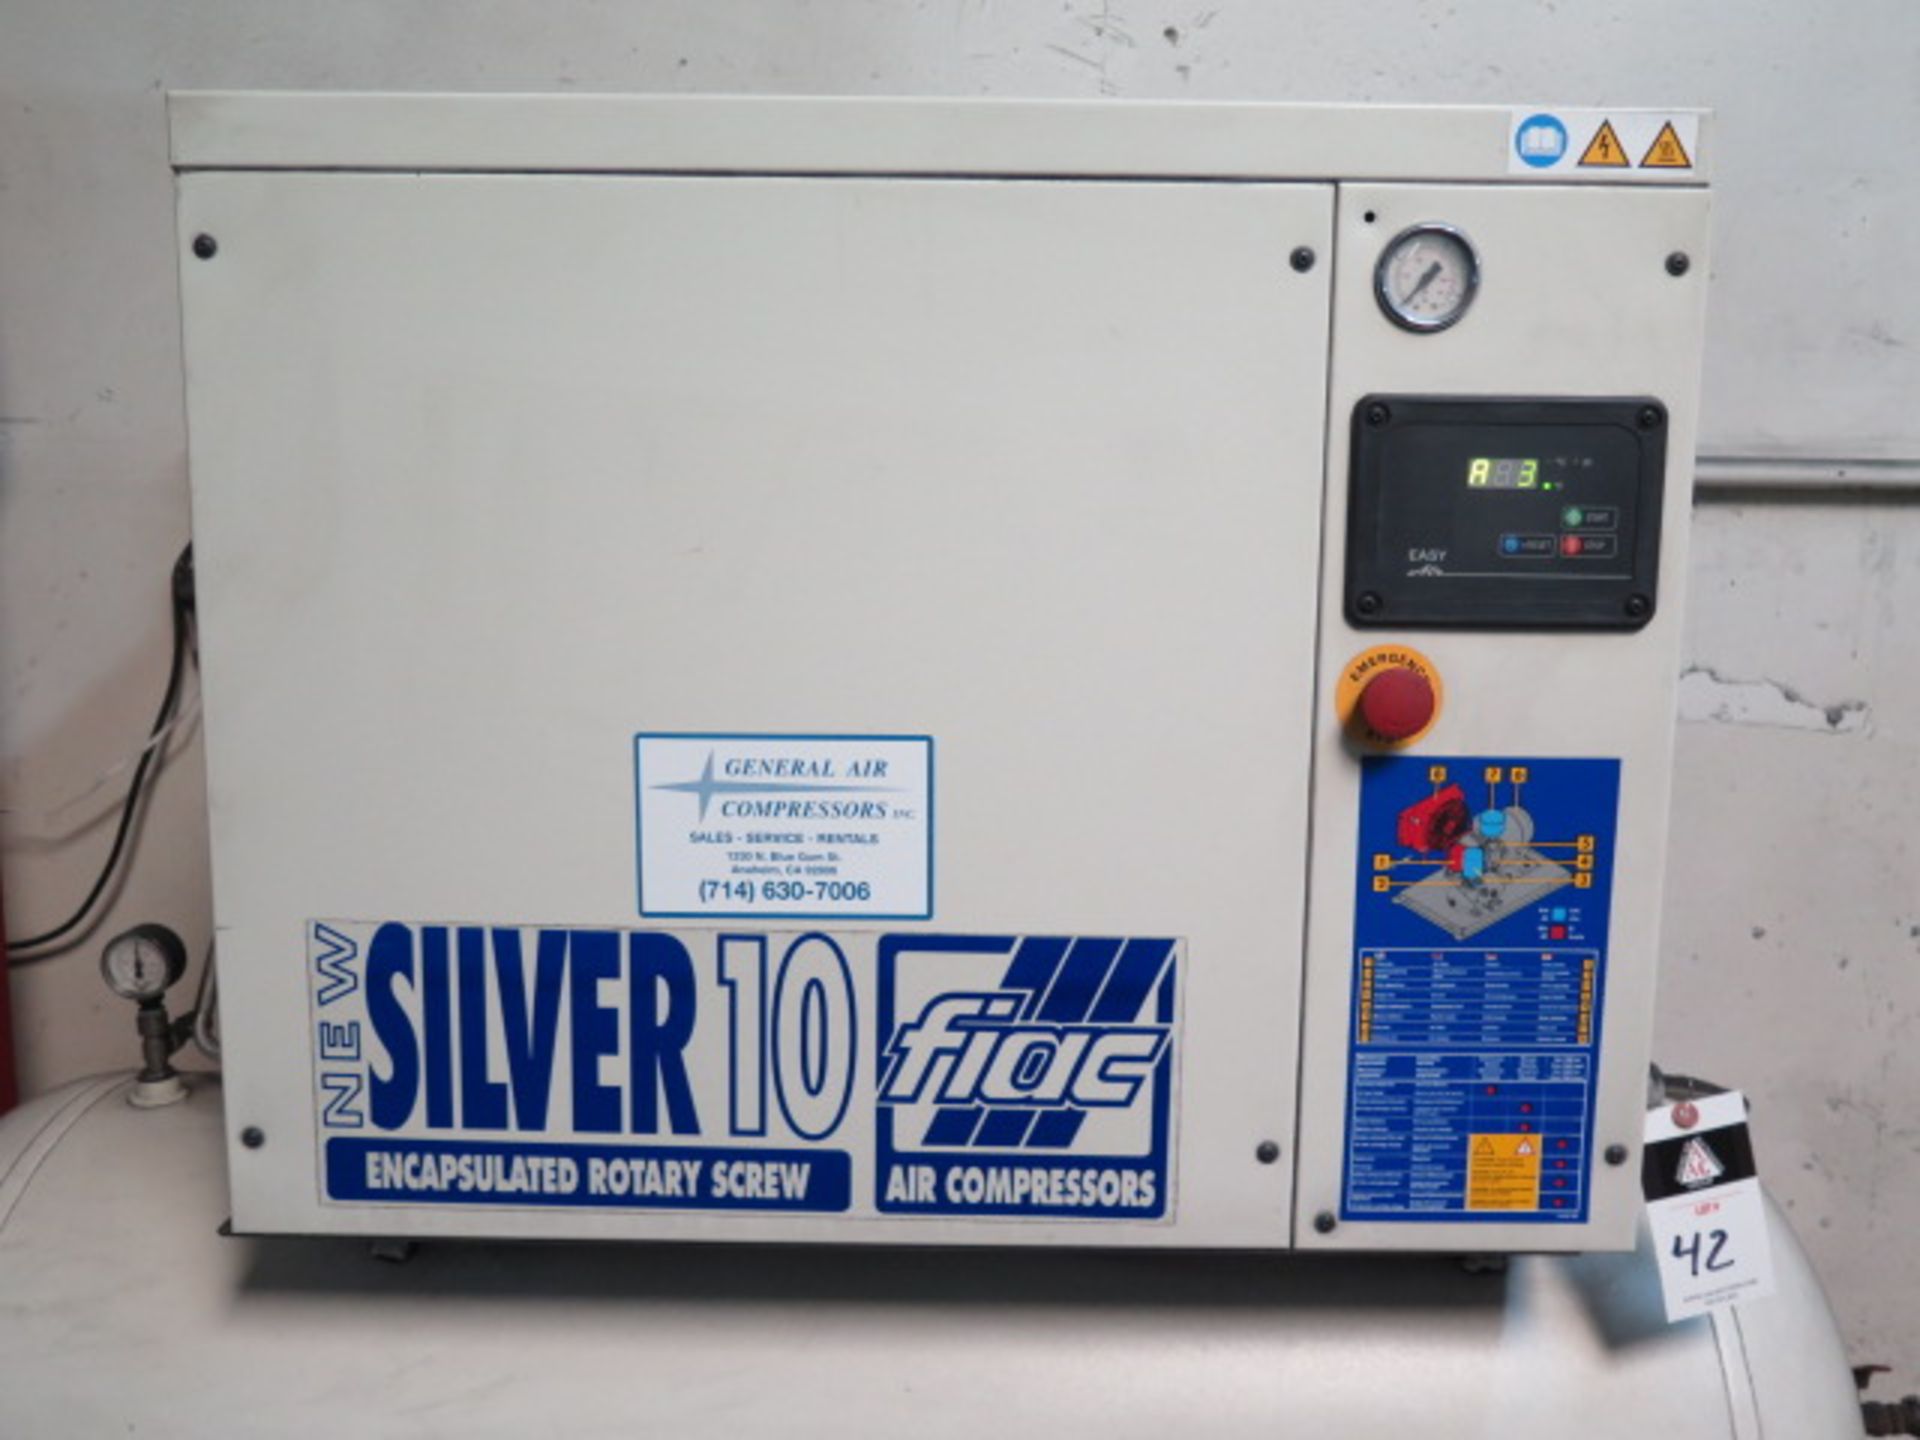 2017 Fiac “New Silver 10/300” Encapsulated Rotary Screw Air Compressor s/n BN9-43408, SOLD AS IS - Image 4 of 10